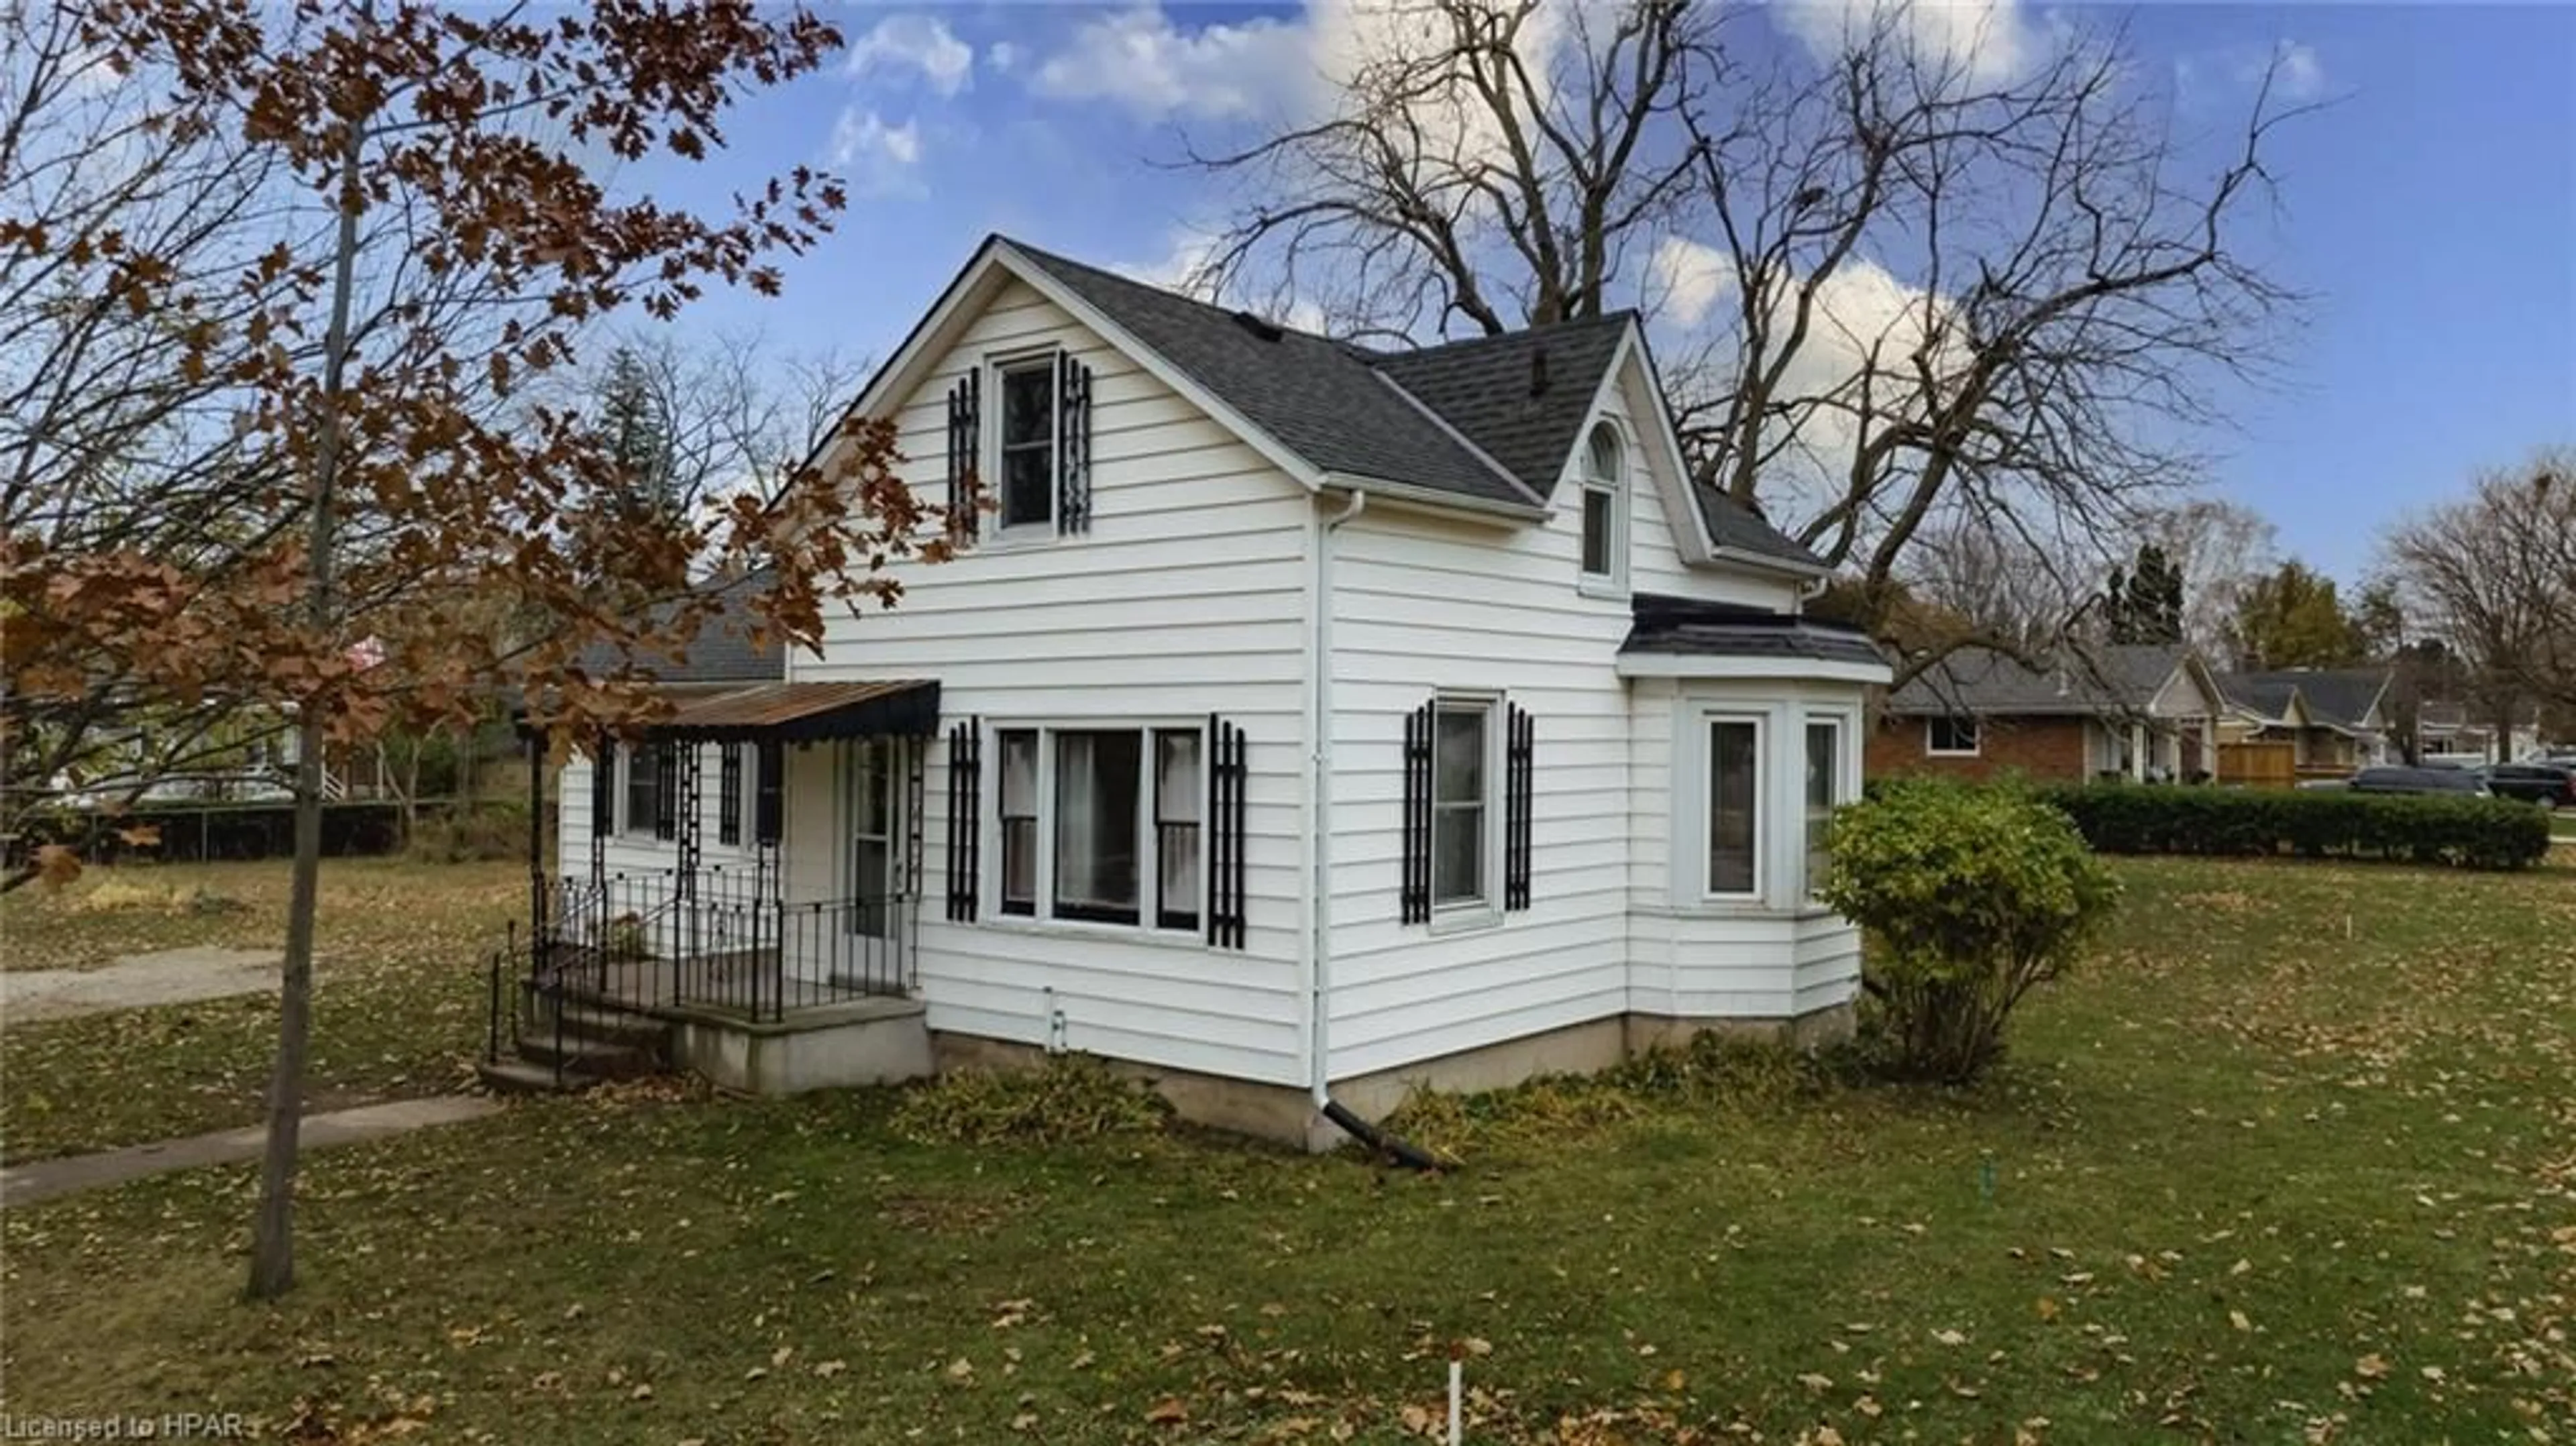 Cottage for 140 Stonehouse St, Goderich Ontario N7A 1G9